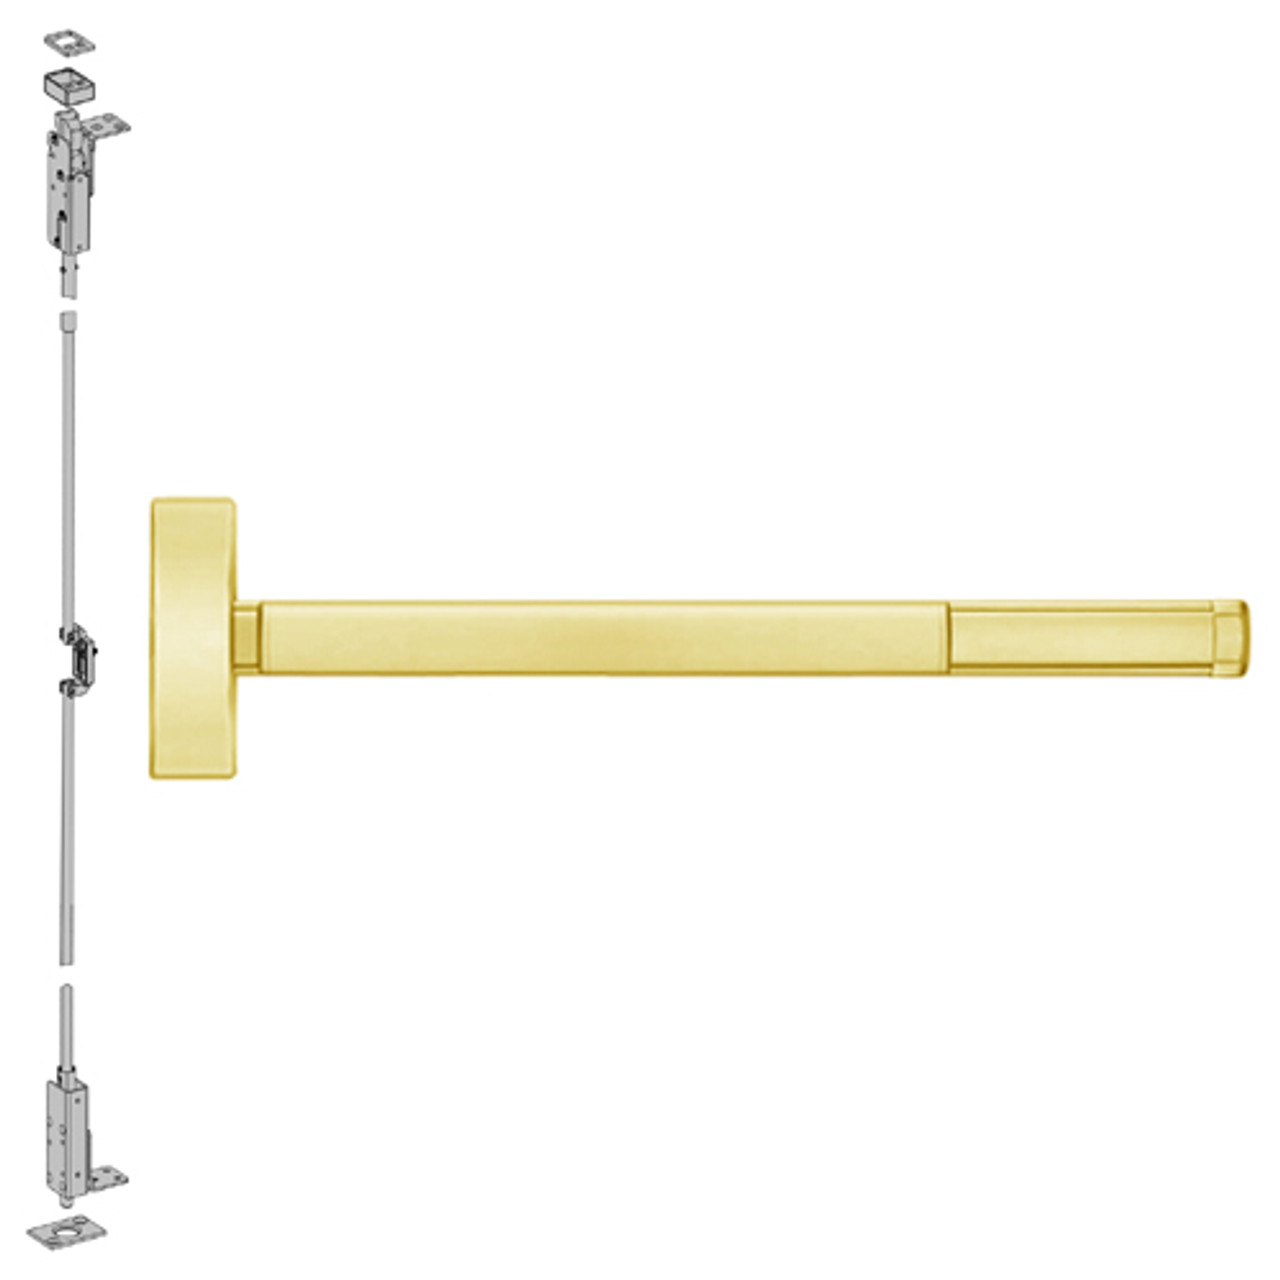 2703-605-48 PHI 2700 Series Non Fire Rated Wood Door Concealed Vertical Exit Device Prepped for Key Retracts Latchbolt in Bright Brass Finish